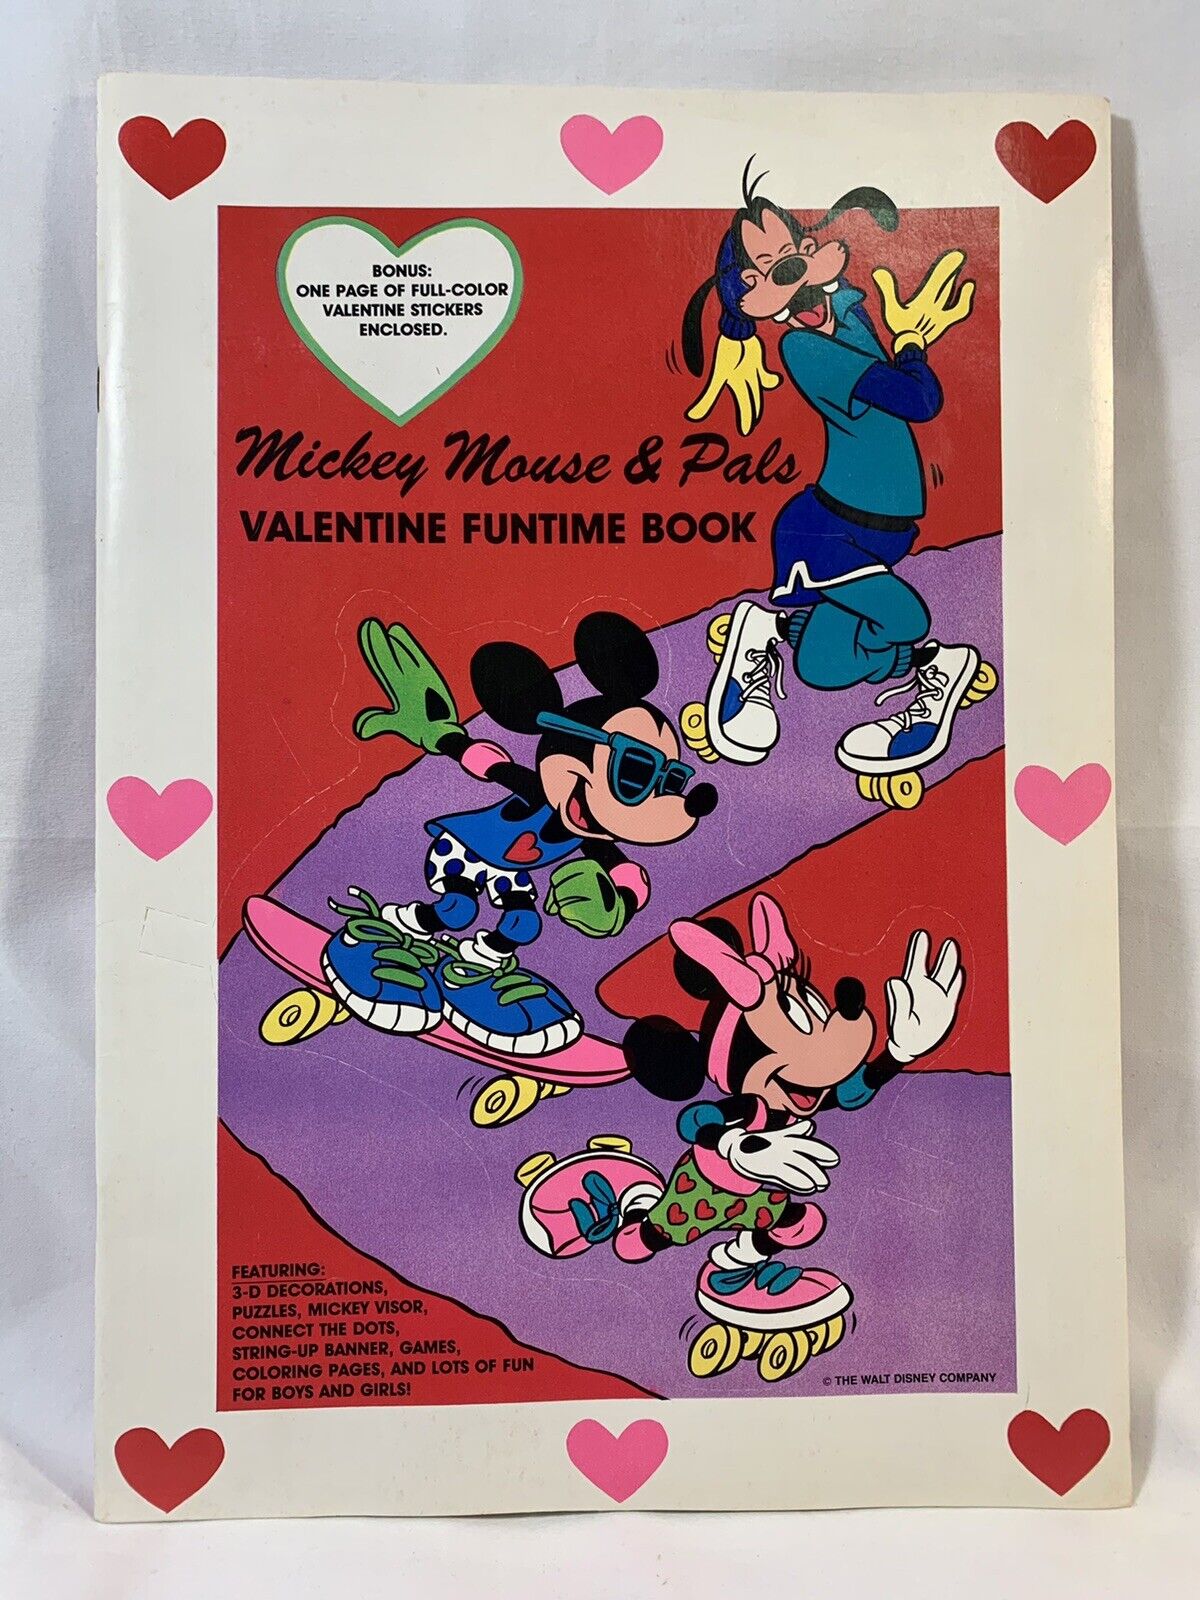 VTG Disney Mickey Mouse & Pals FunTime Valentines Activity Book Large 10”x14”